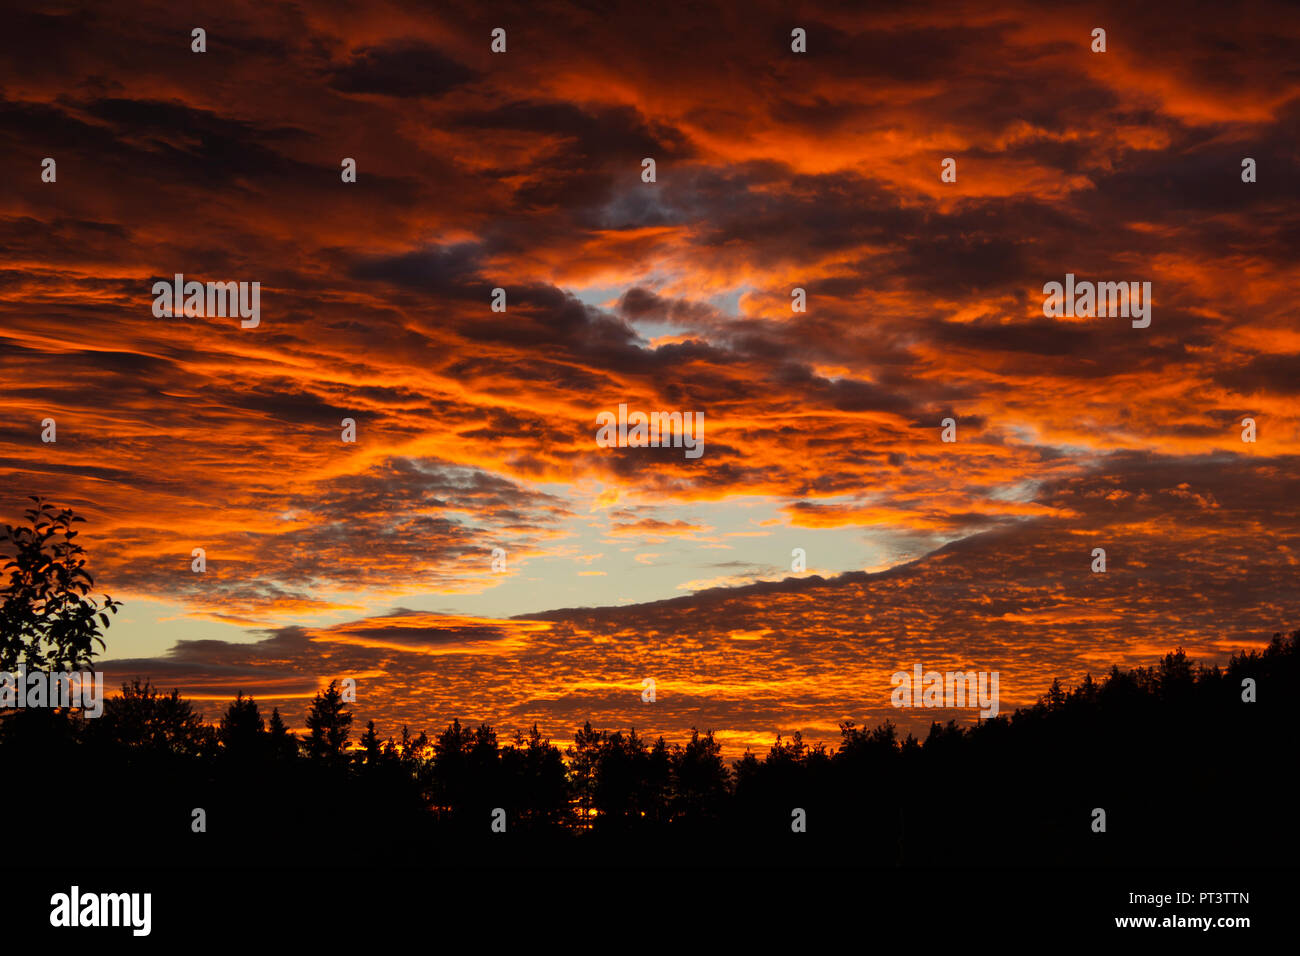 Clouds lit orange with a fallstreak hole in the middle. Silhouette of ...